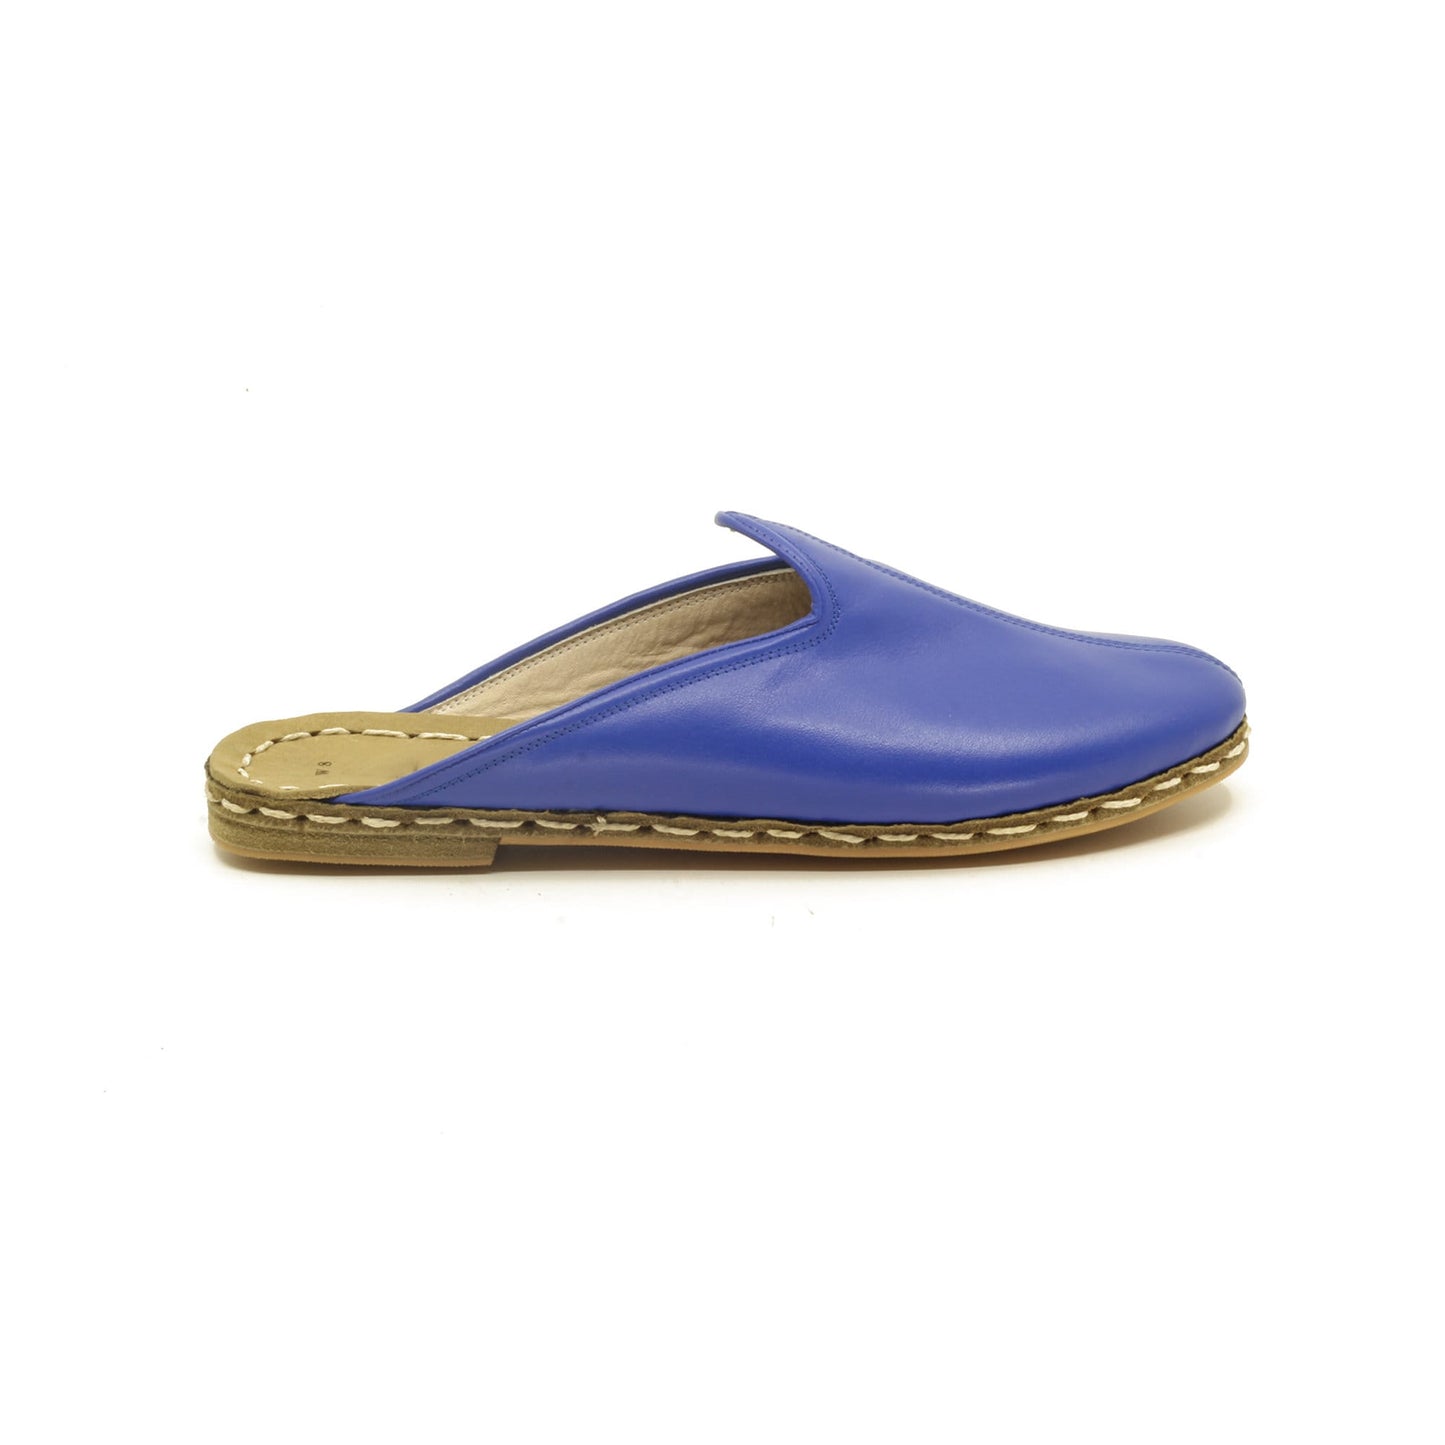 Close Toed Slippers - Blue Leather - Winter Slippers - Rubber Sole - For Women